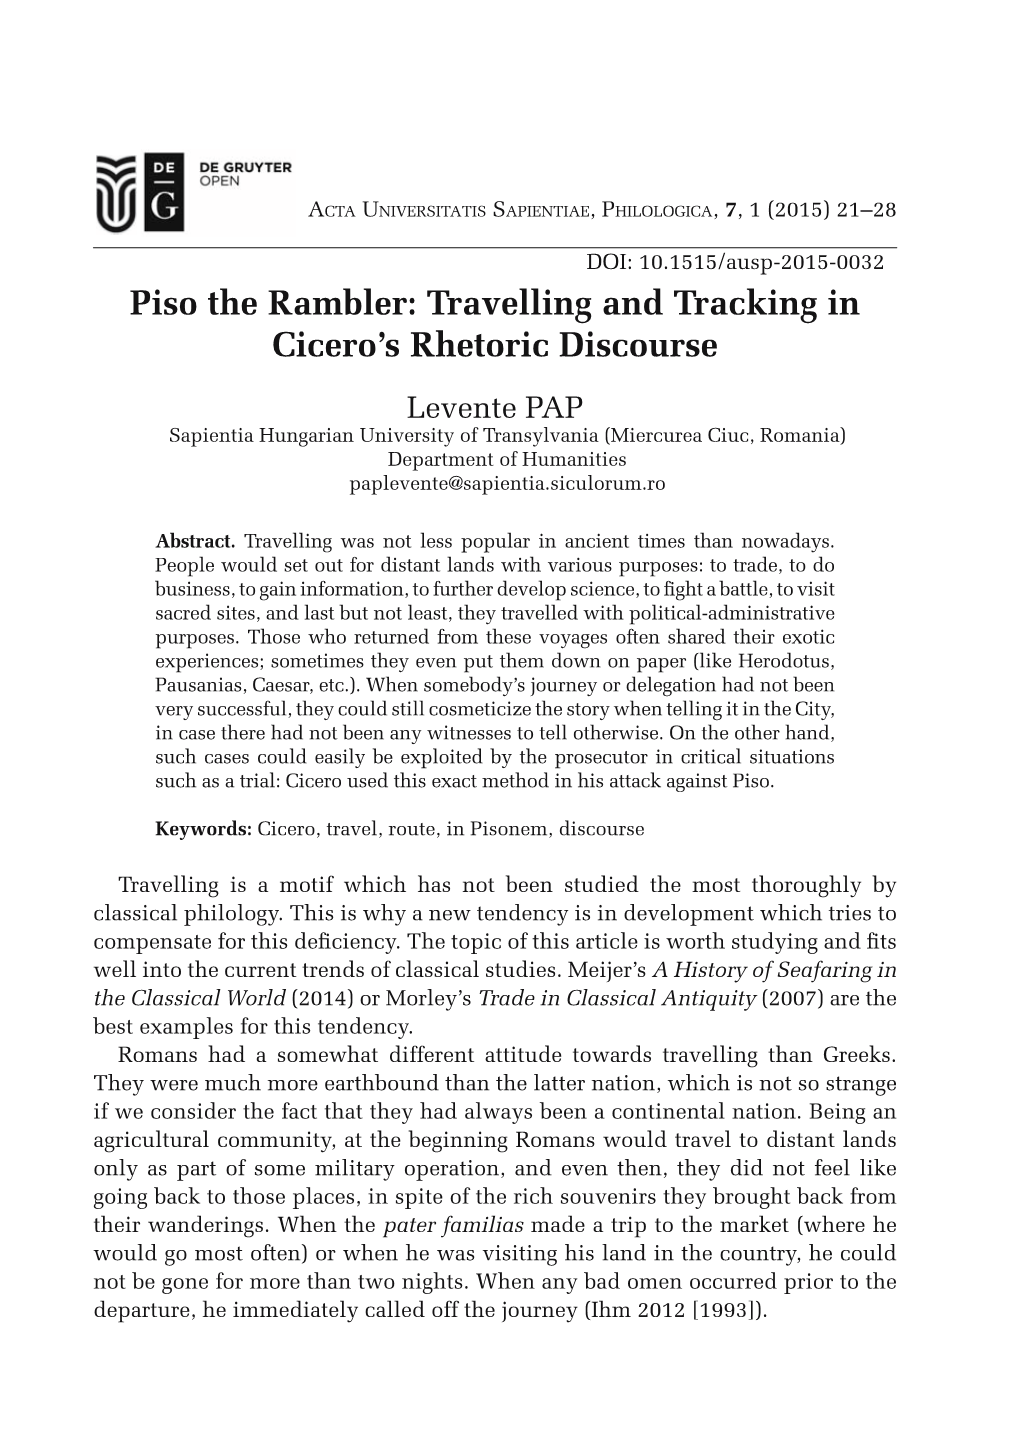 Piso the Rambler: Travelling and Tracking in Cicero's Rhetoric